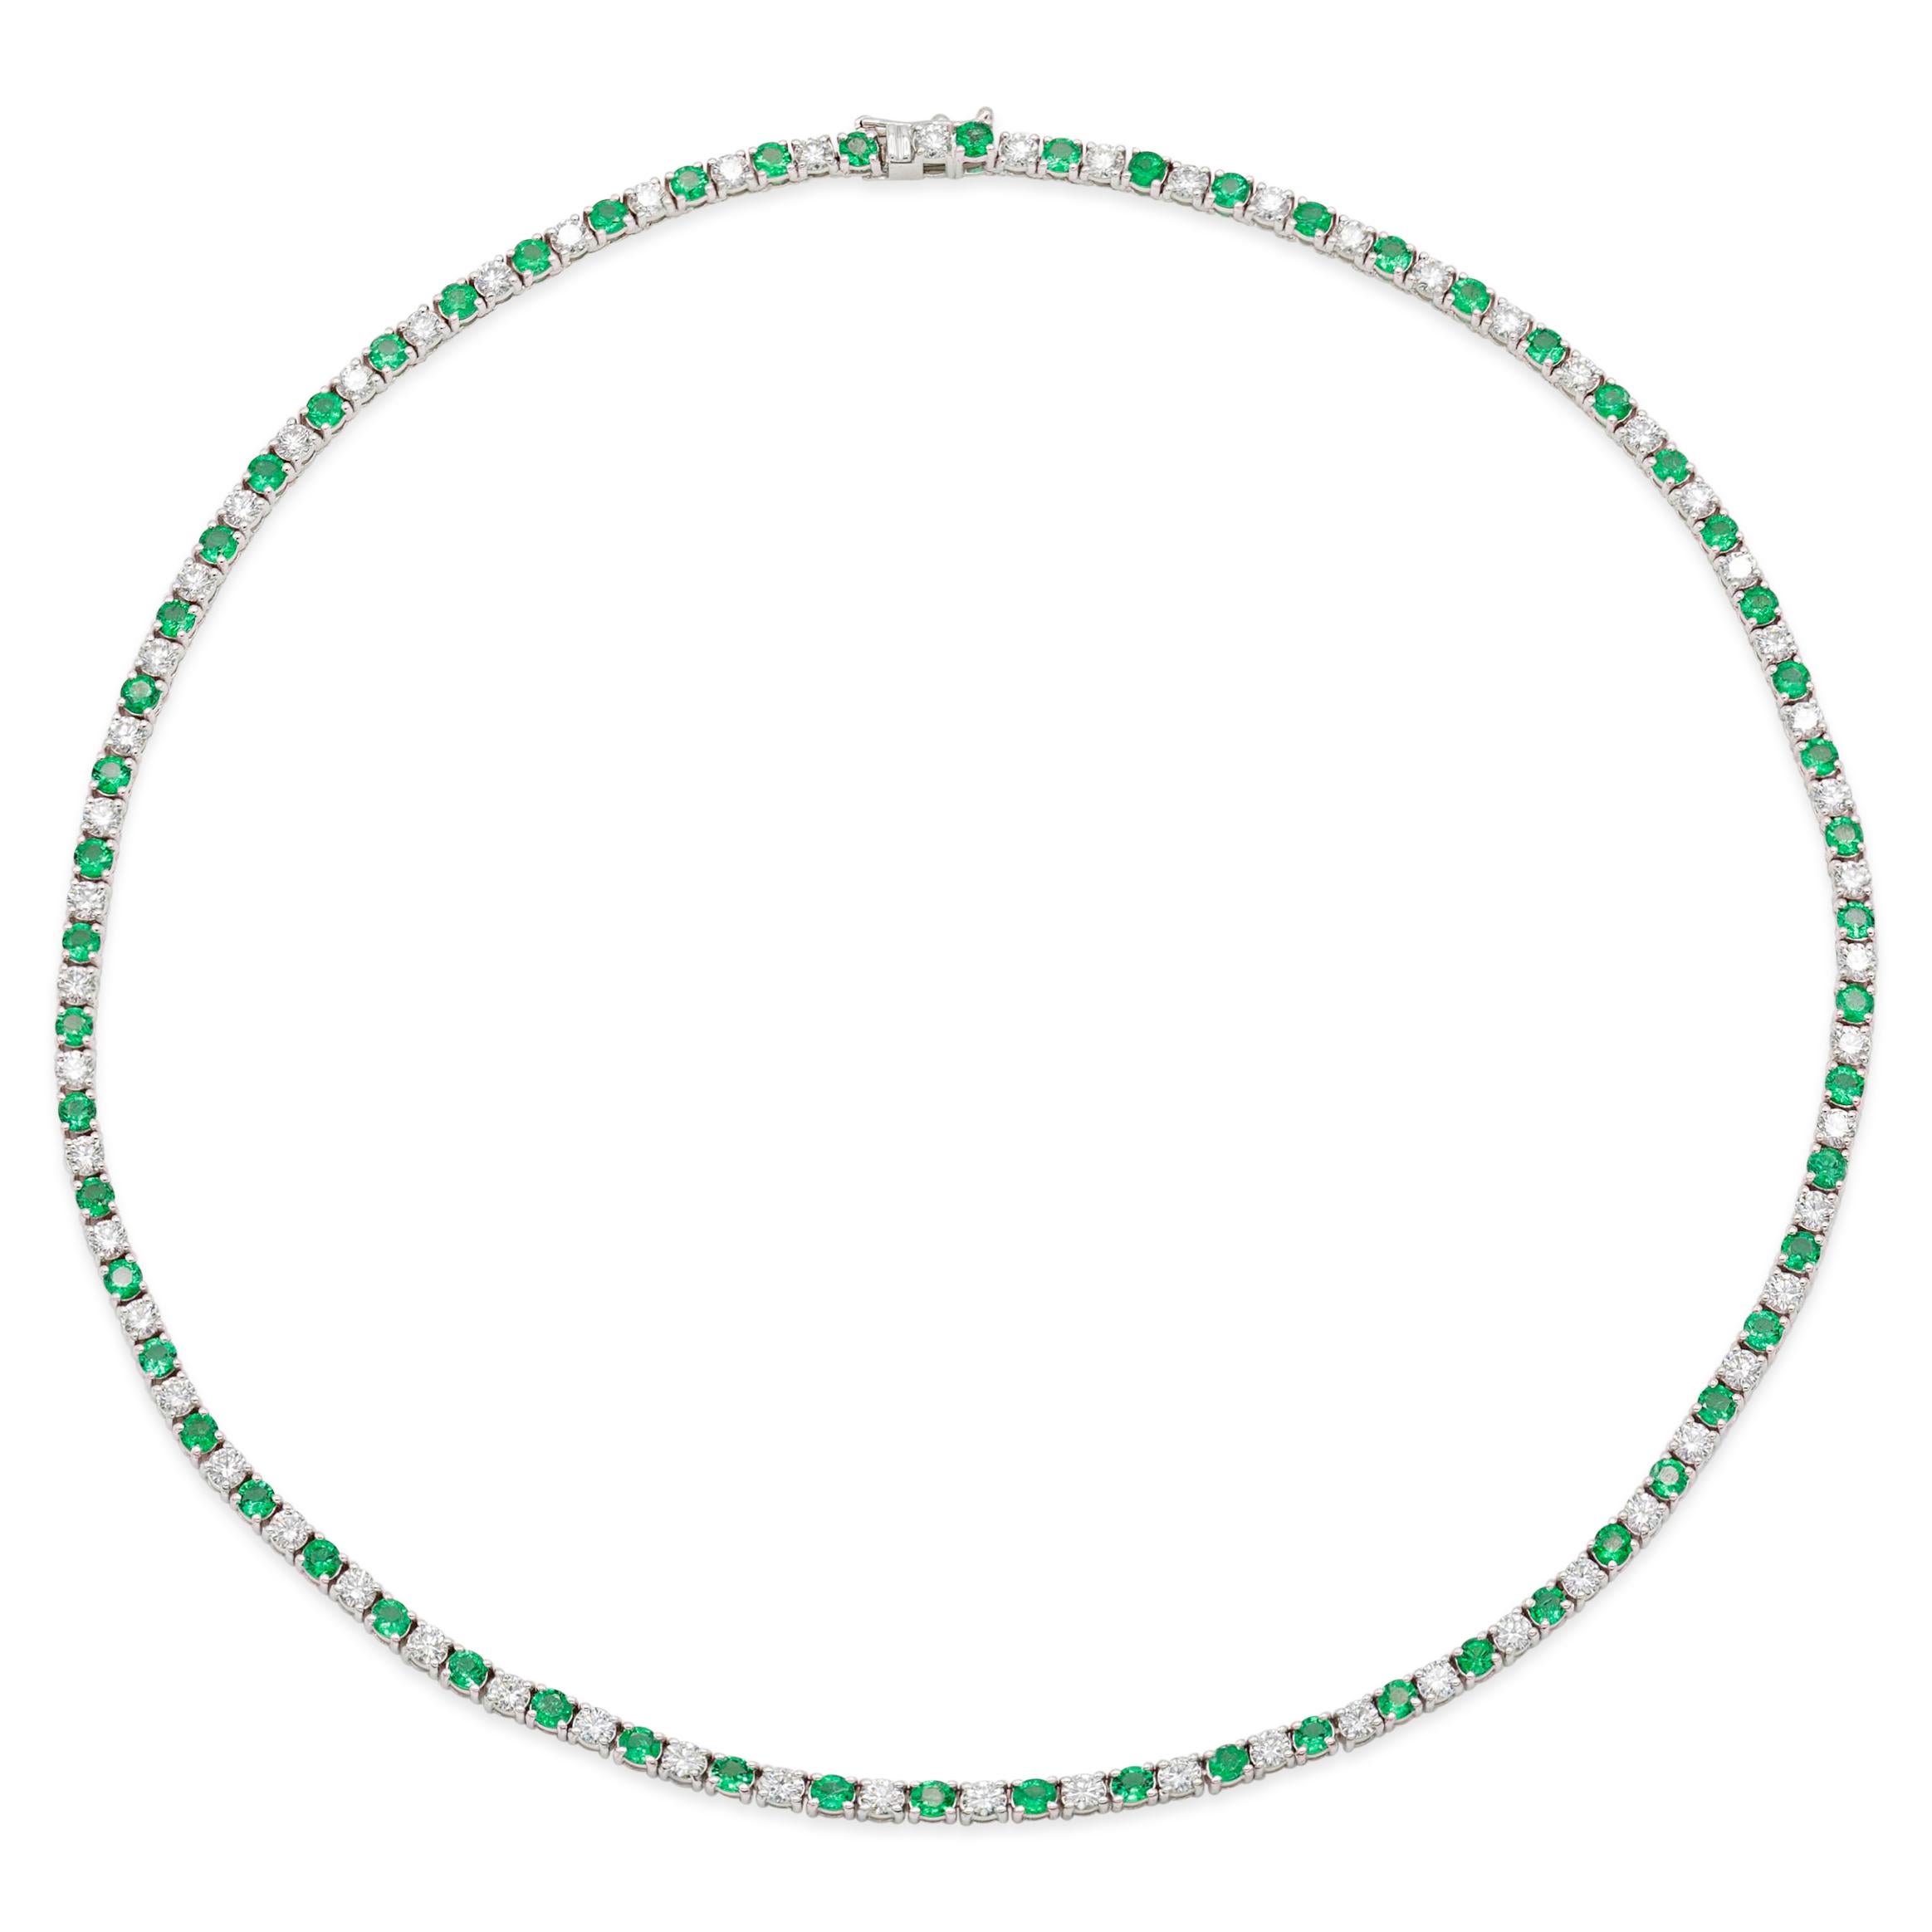 Handmade Classic Tennis Necklace in 18K White Gold with 16 RB Cut Diamonds D color VVS1 clarity, weighting in total 5.37 ct, & 61 RB Cut Natural Green Emeralds, weighting in total 5.50ct. This stunning piece is 16.00 inches long. 

Viewings